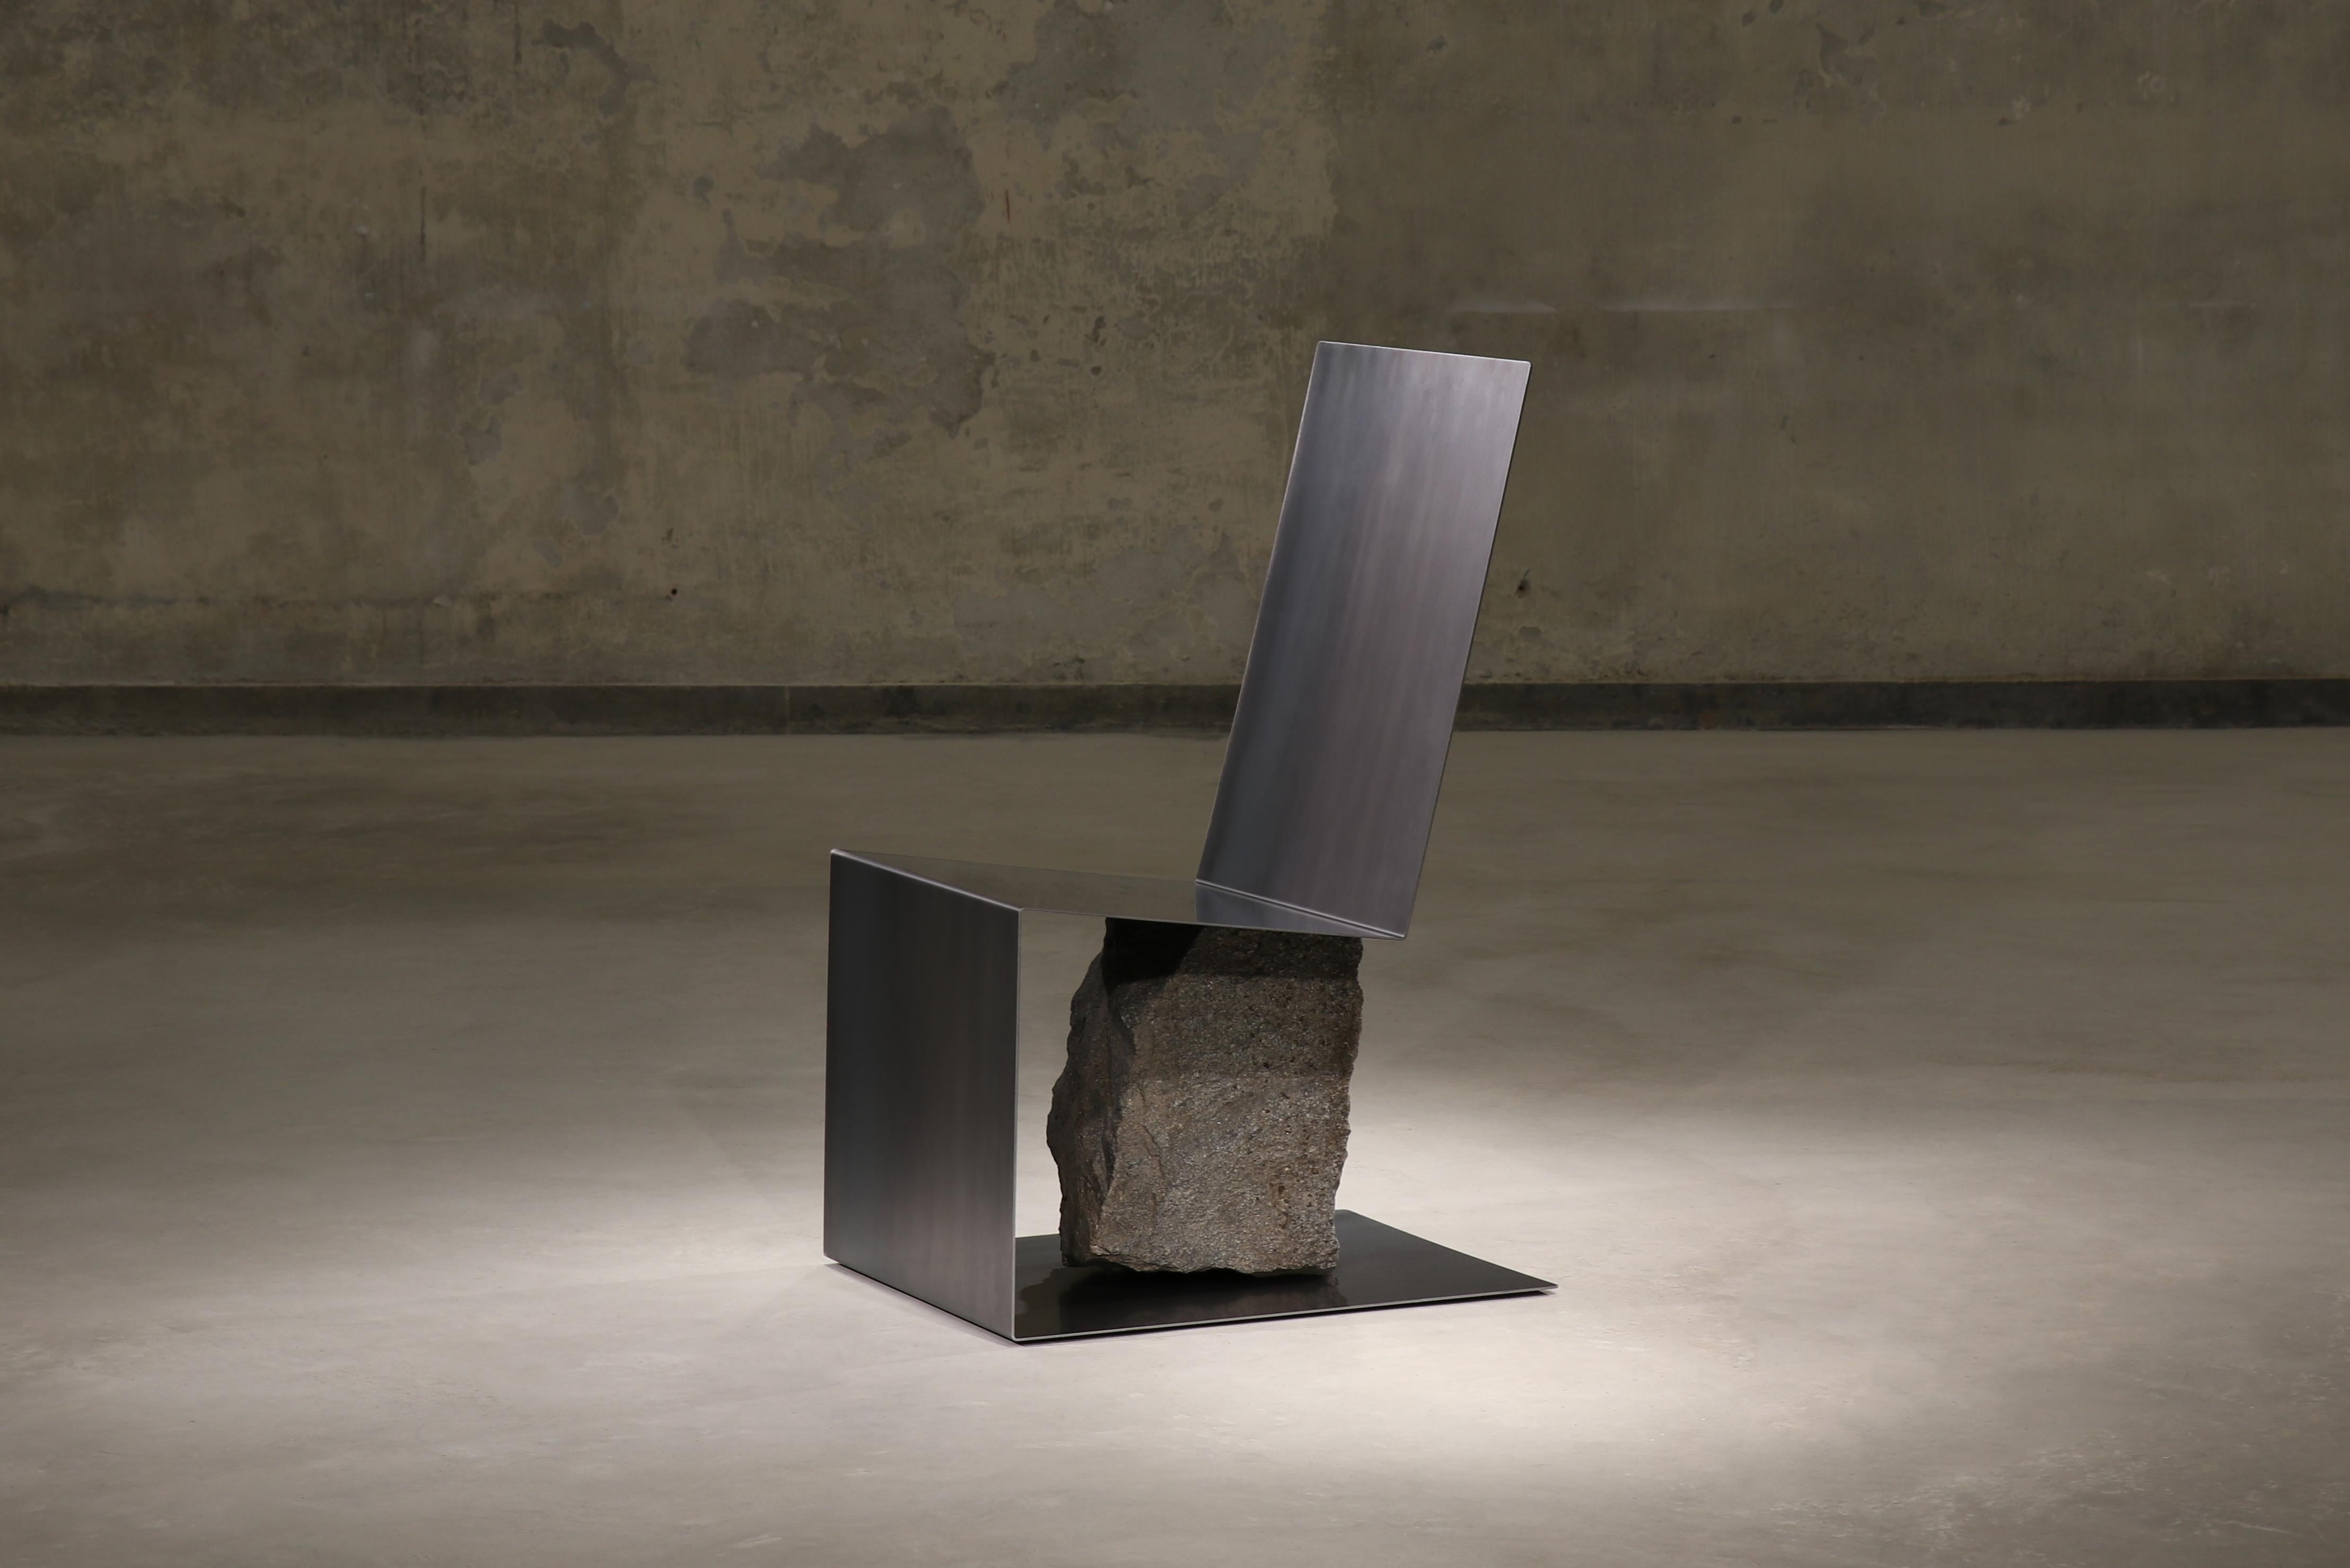 Steel and stone chair by Batten and Kamp
Shelter to Ground Collection
Dimensions: W 48 x D 61 x H 95 cm
Materials: Hand finished hot rolled steel, natural stone

The stone is sourced first, and then the proportions of the steel adjusted to suit